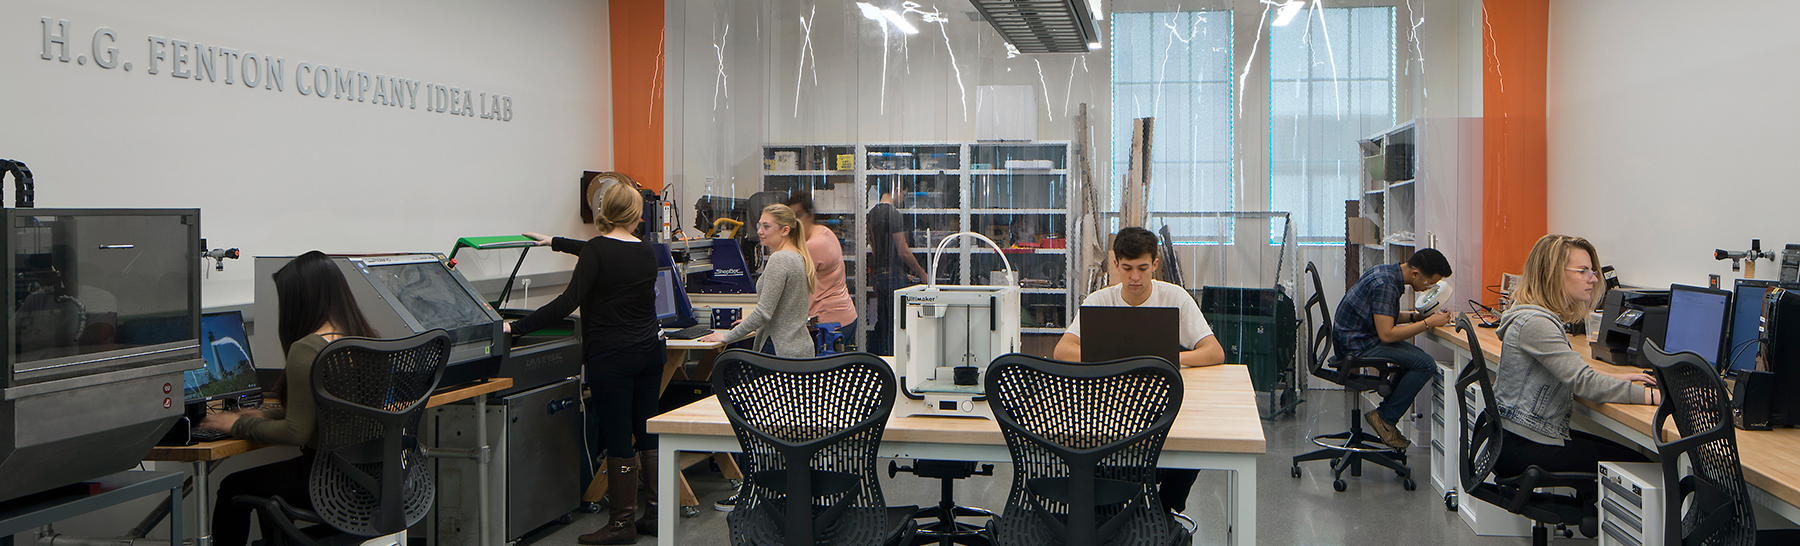 Students working in the H.G. Fenton Company Idea Lab.